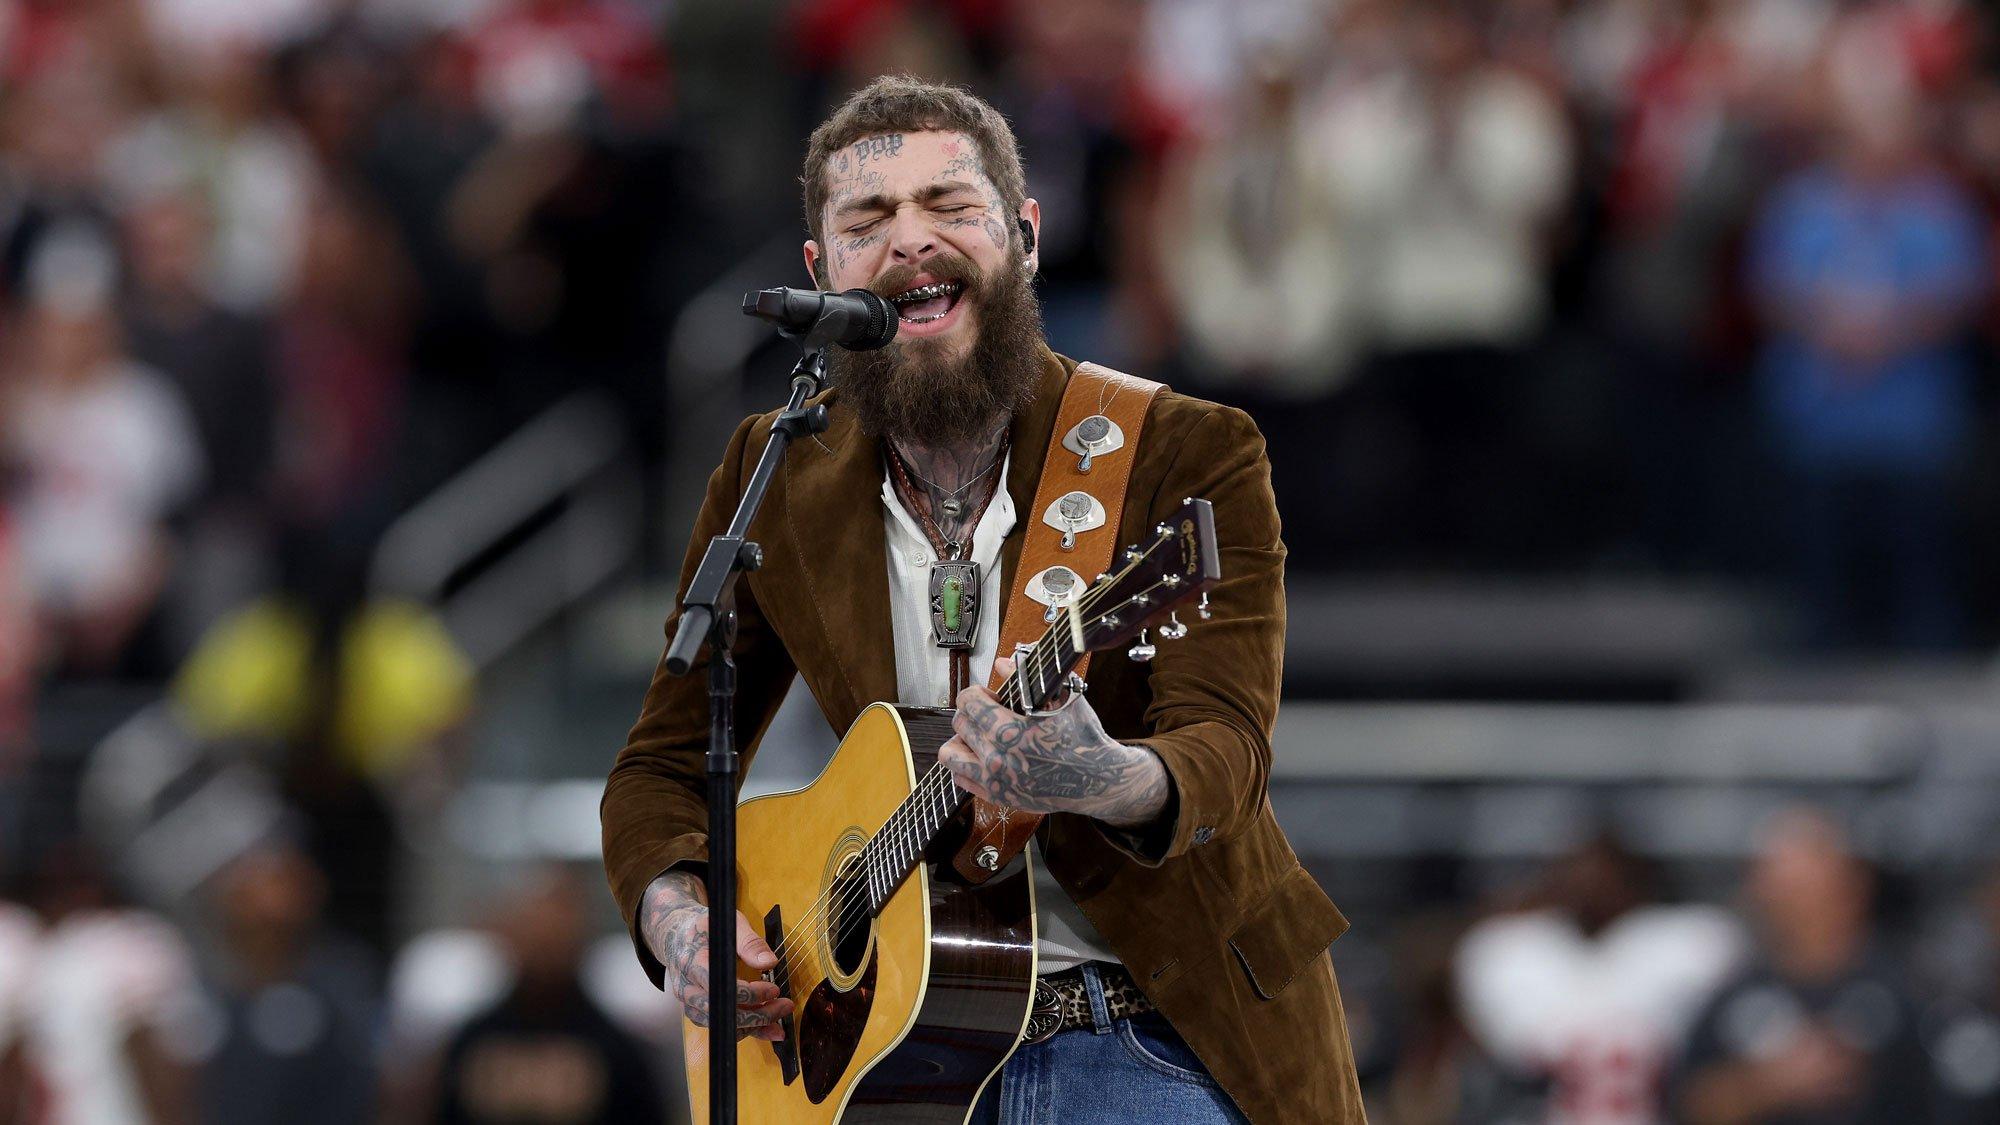 Post Malone Goes Country for “America The Beautiful” at Super Bowl LVIII